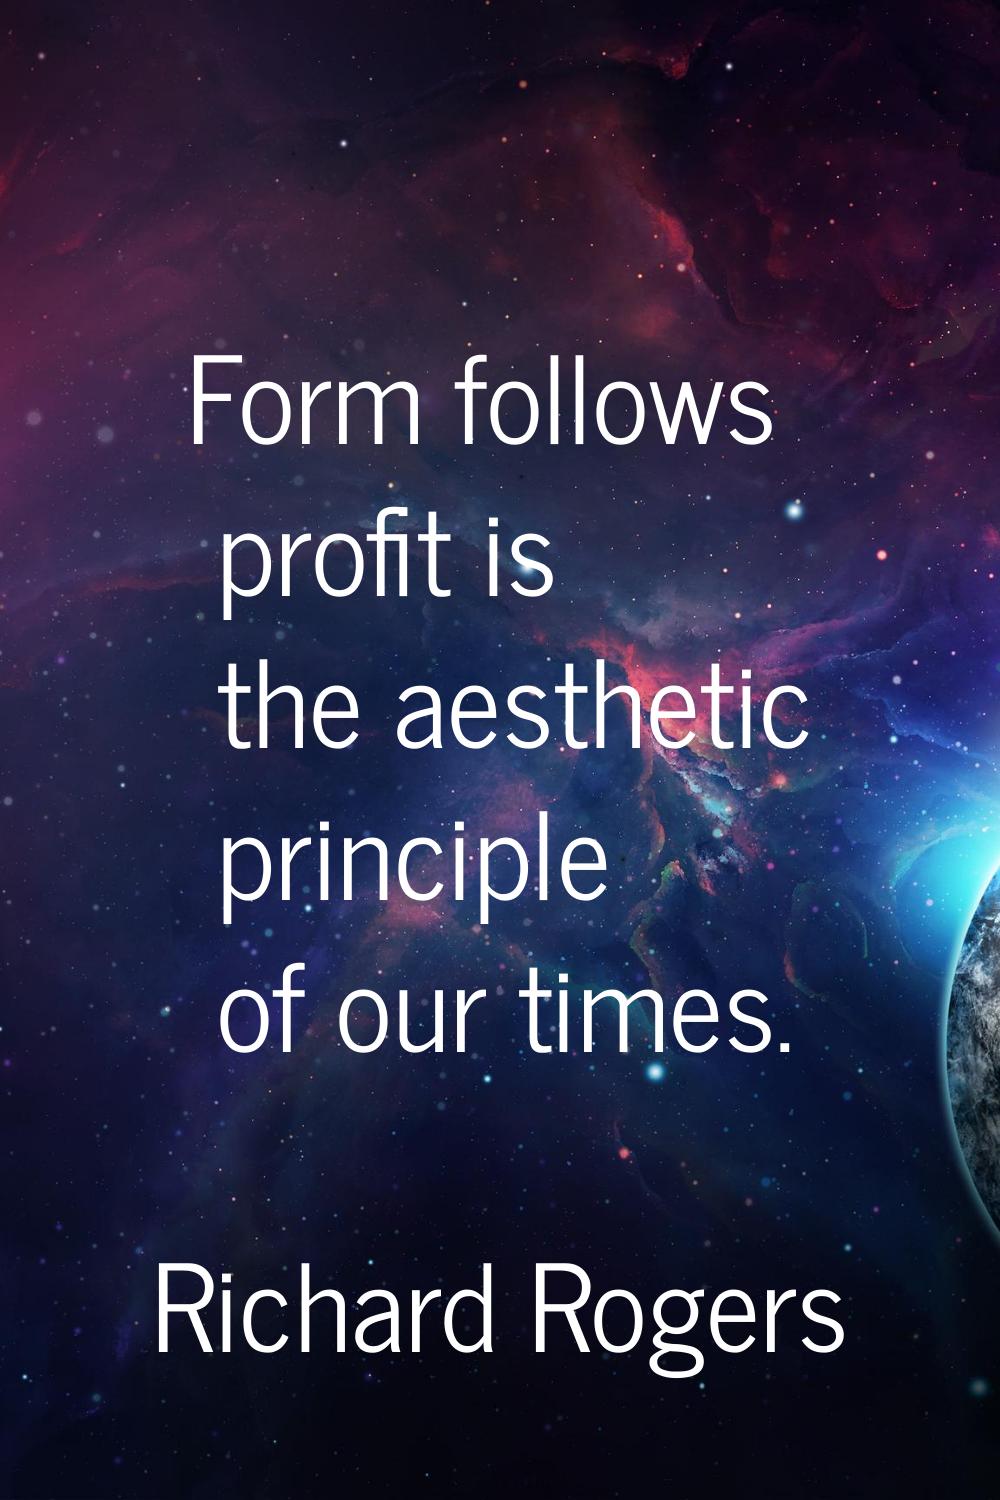 Form follows profit is the aesthetic principle of our times.